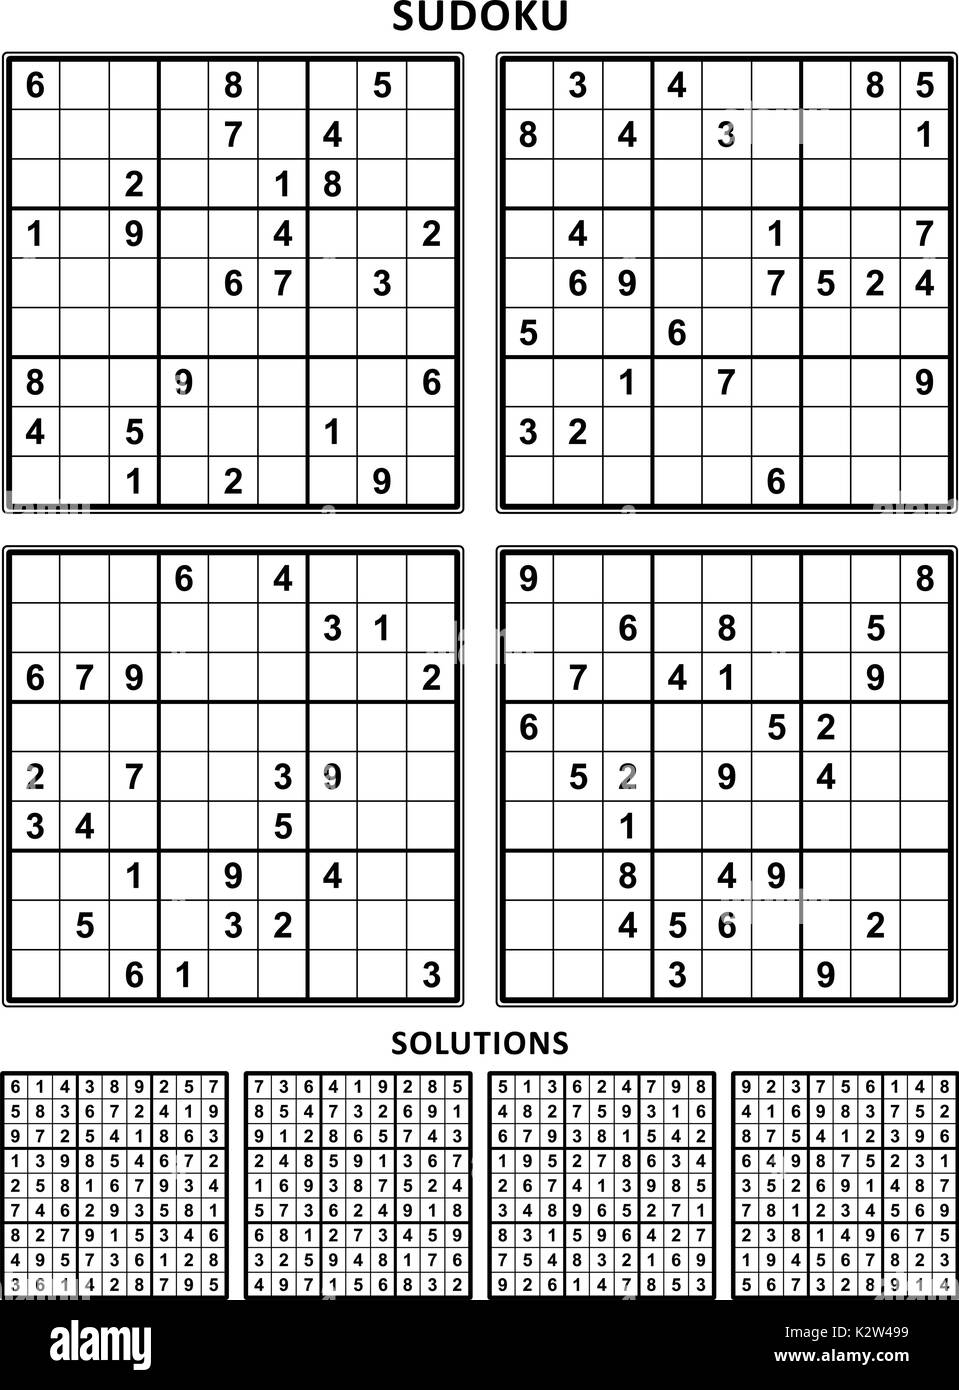 Four sudoku puzzles of comfortable (easy, yet not very easy) level, suitable for large print books, answers included. Set 7. Stock Vector